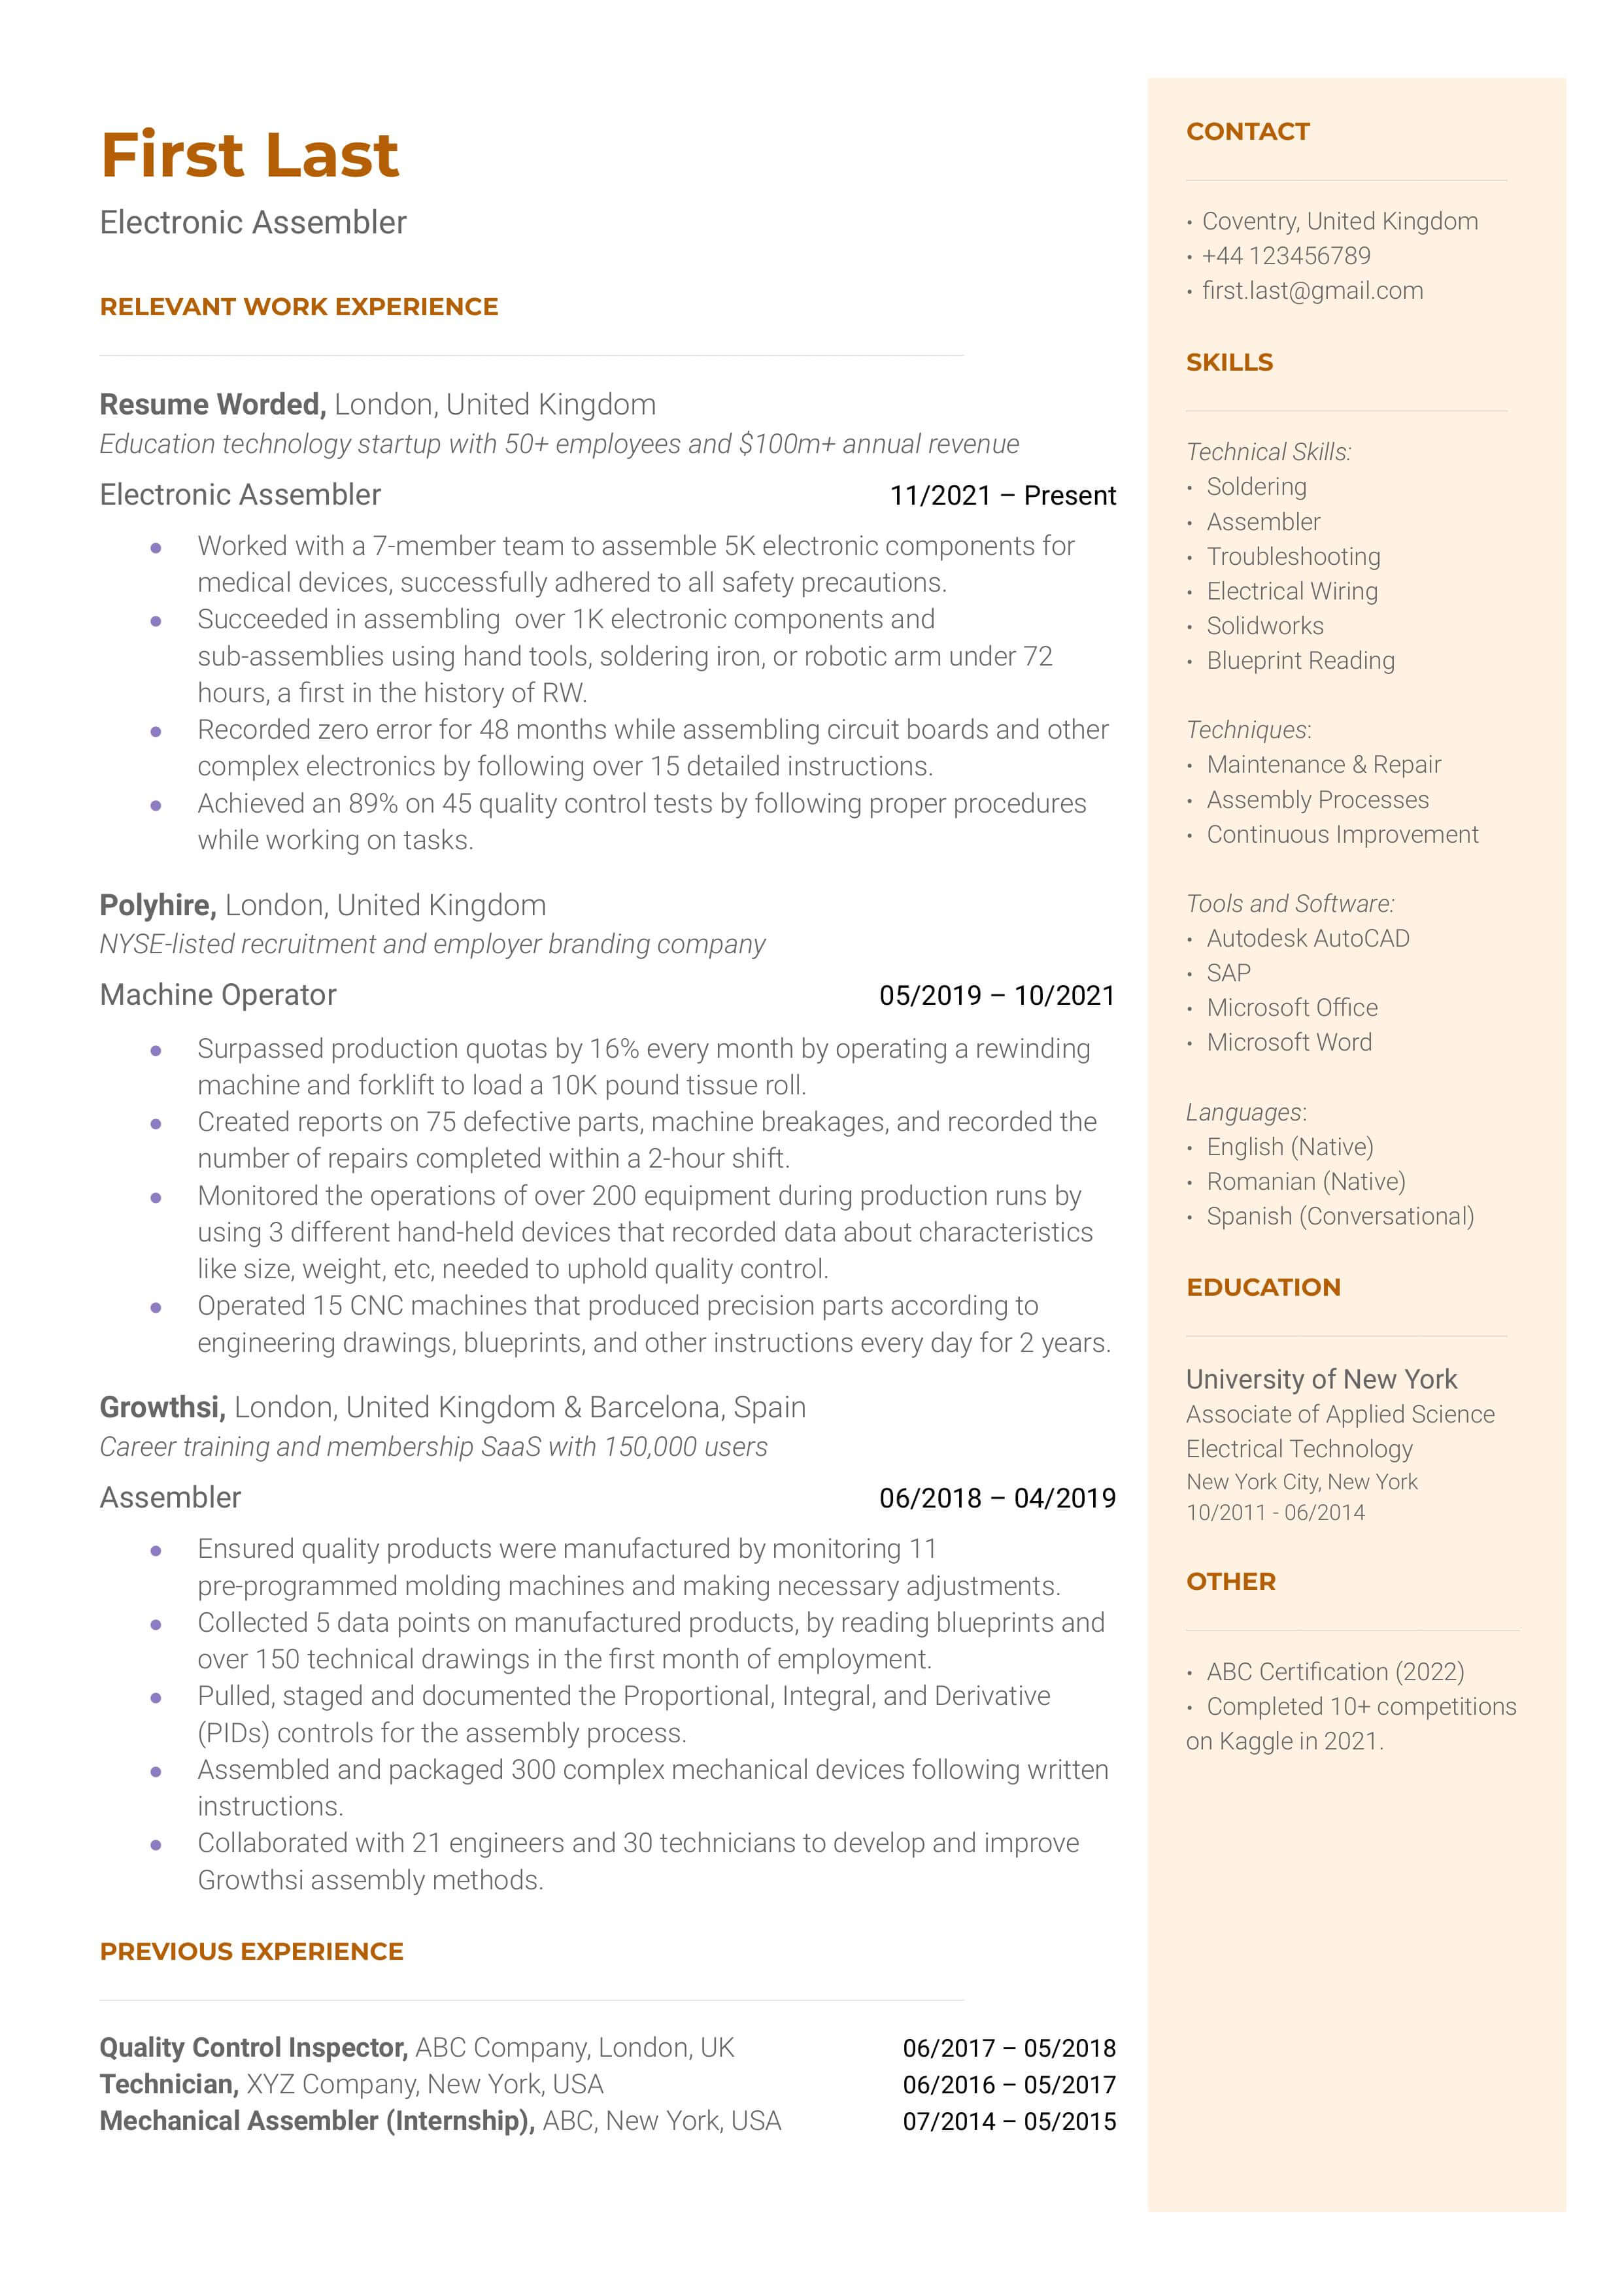 An electronic assembler resume sample that highlights the applicant's skill set and extensive experience.